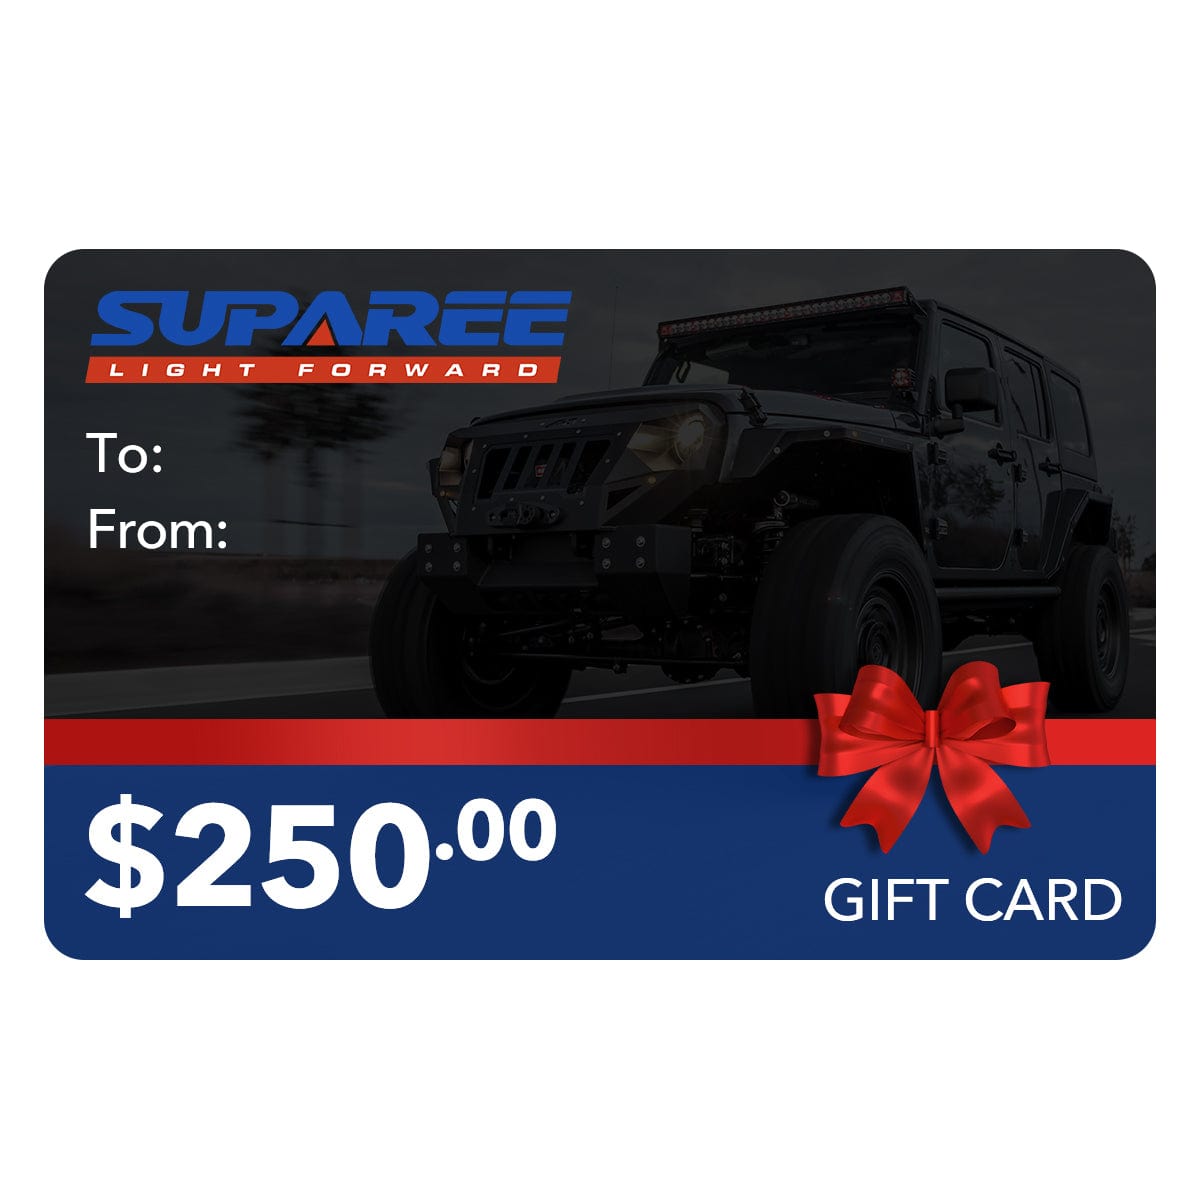 SUPAREE.COM Gift Card $250.00 Suparee Gift Card | Gift Certificate Product description